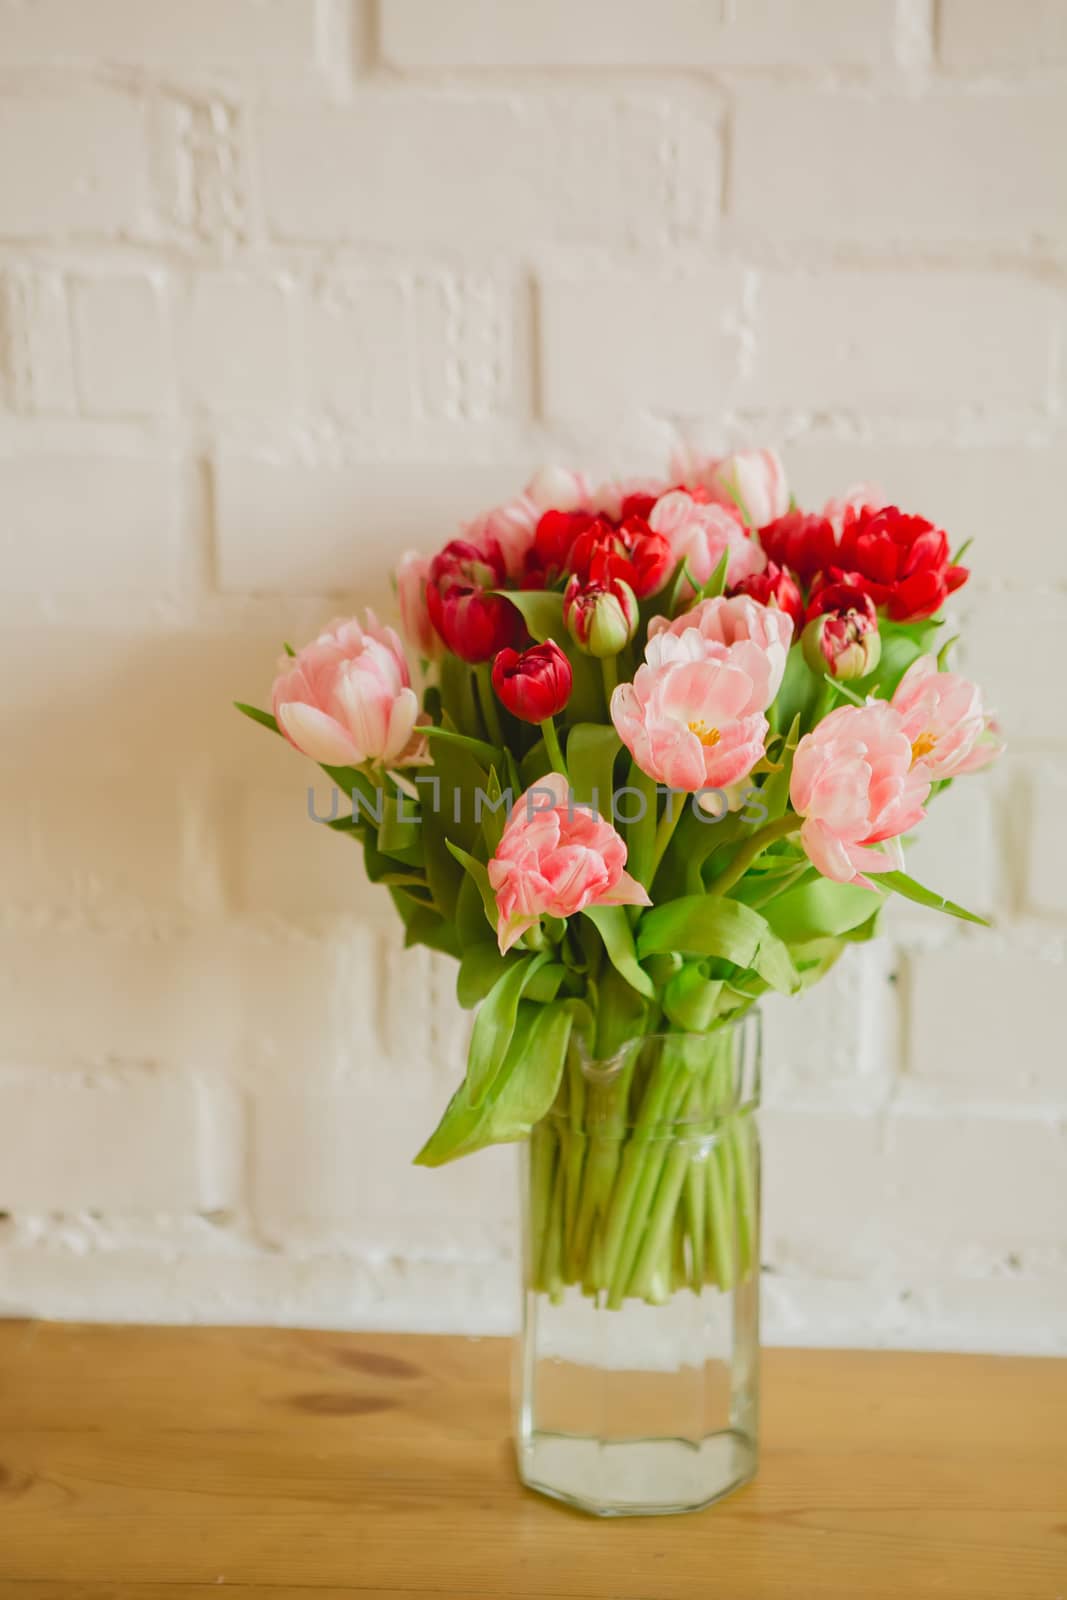 Glass vase with bouquet of beautiful tulips on brick wall background.